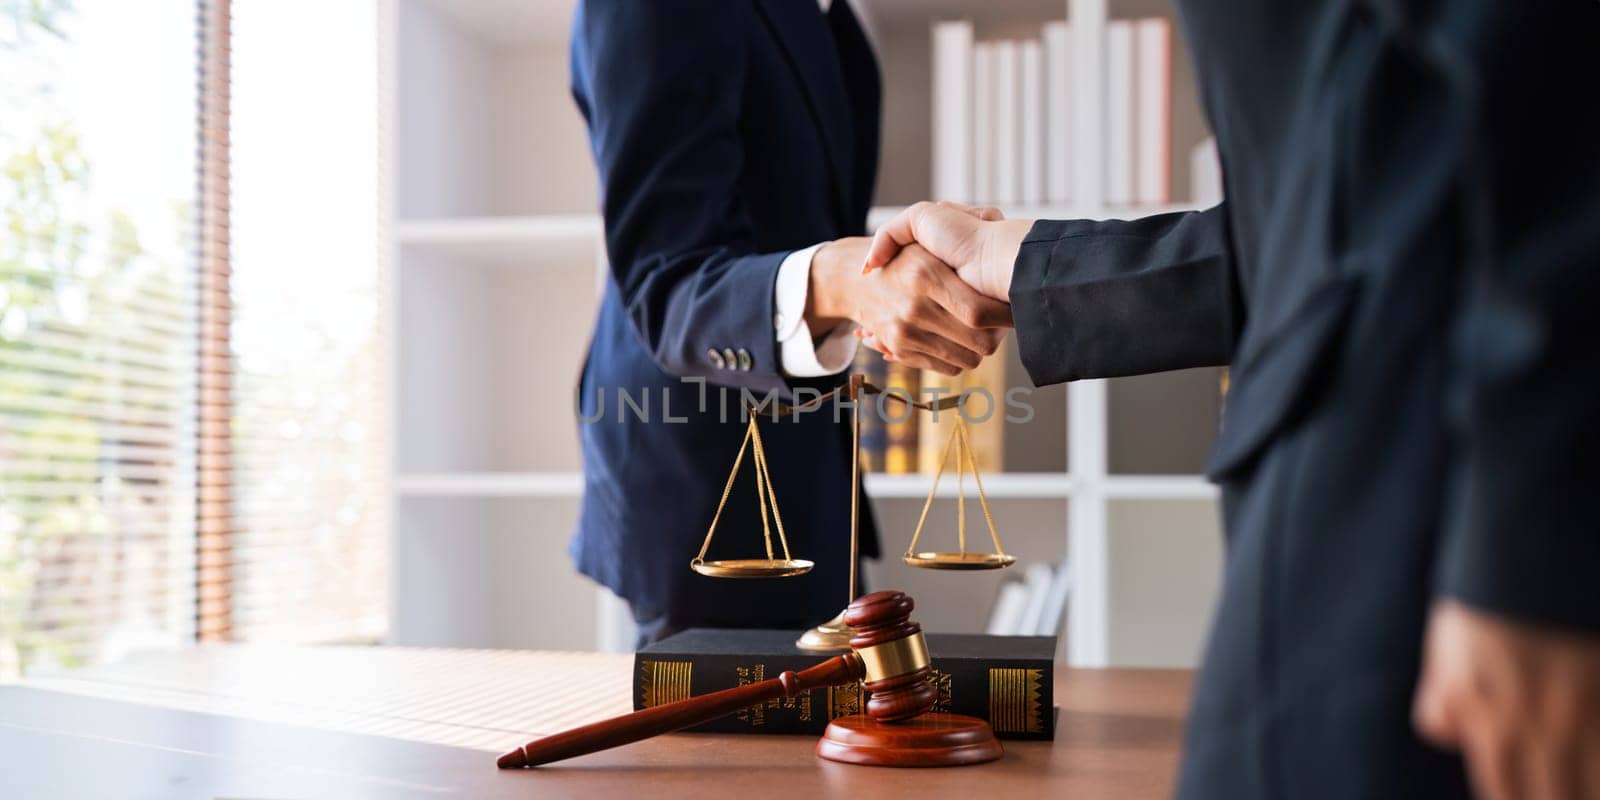 Businessman shaking hands to seal a deal with his partner deal lawyer or attorney discussing a contract agreement. legal, lawyer, real estate, justice concept by nateemee